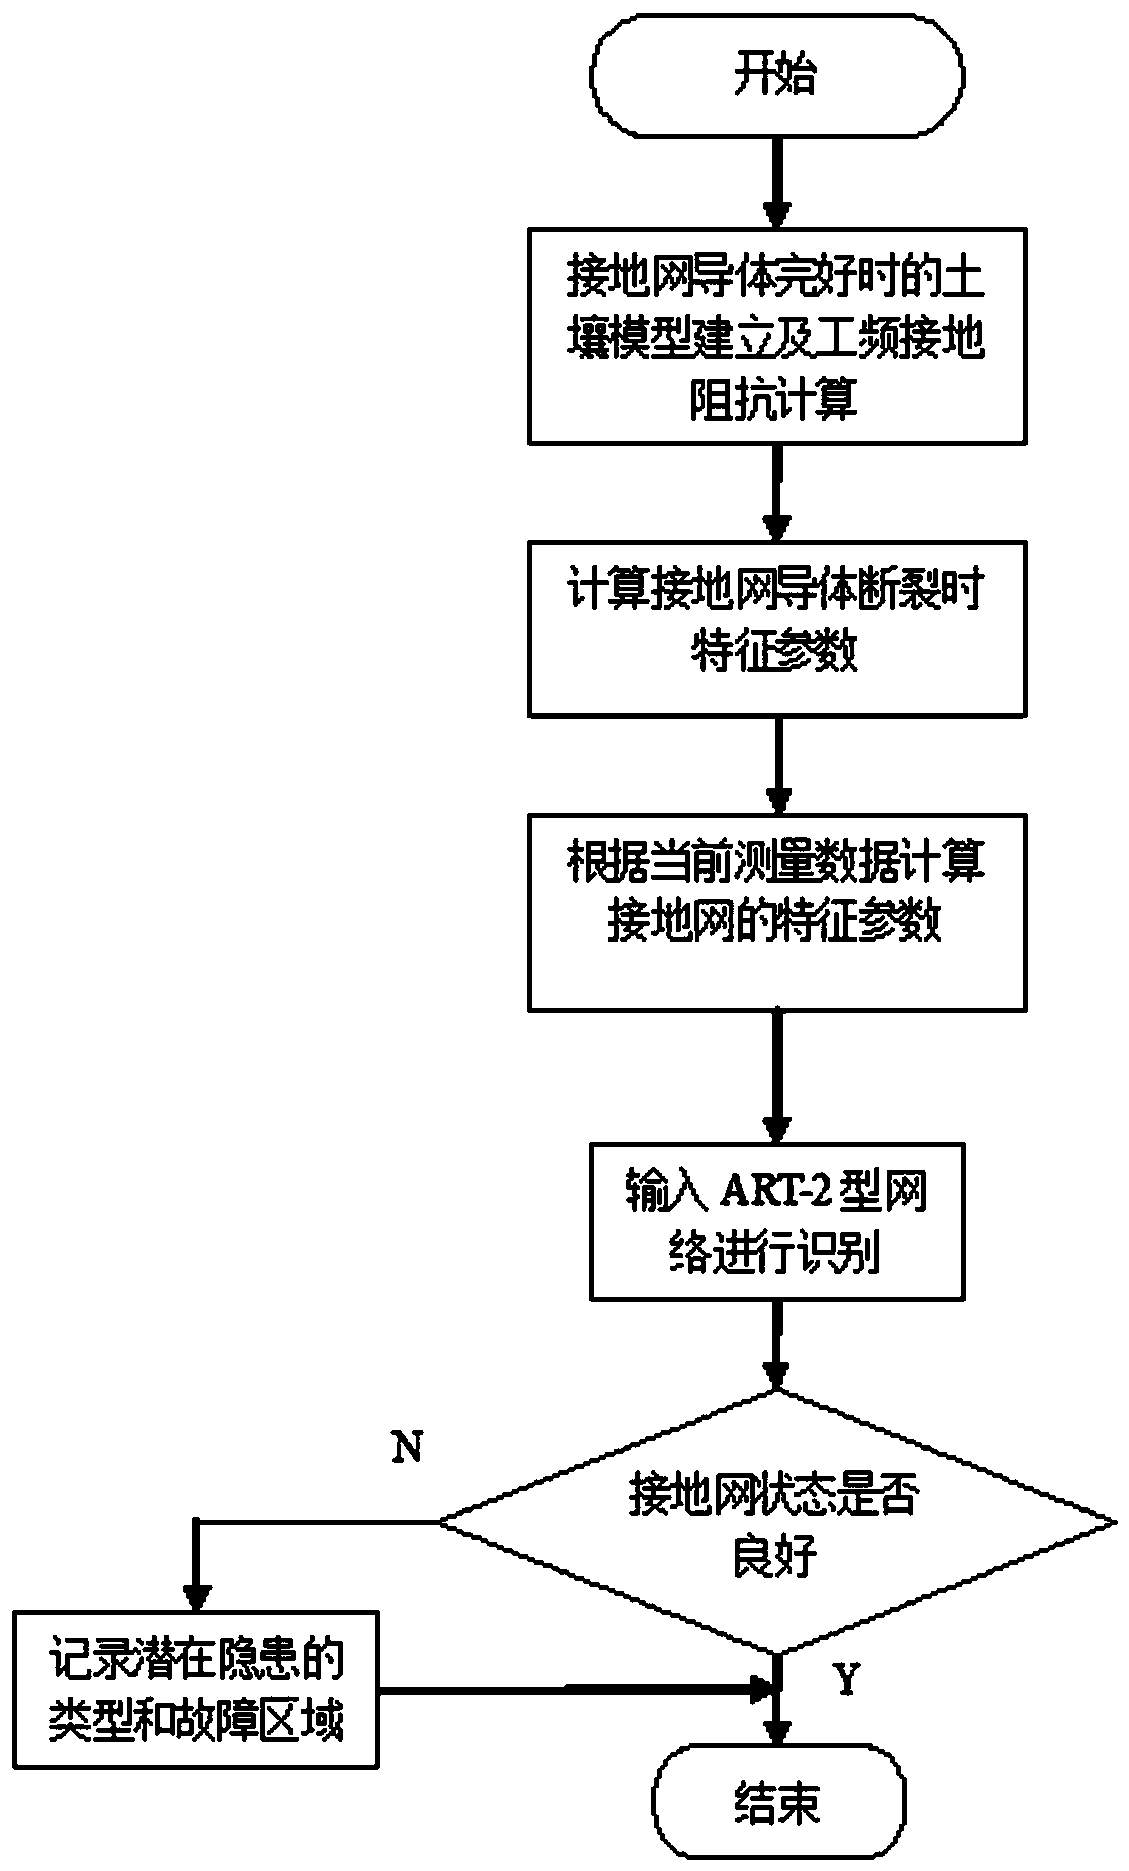 Distributed substation grounding grid detecting and evaluating method